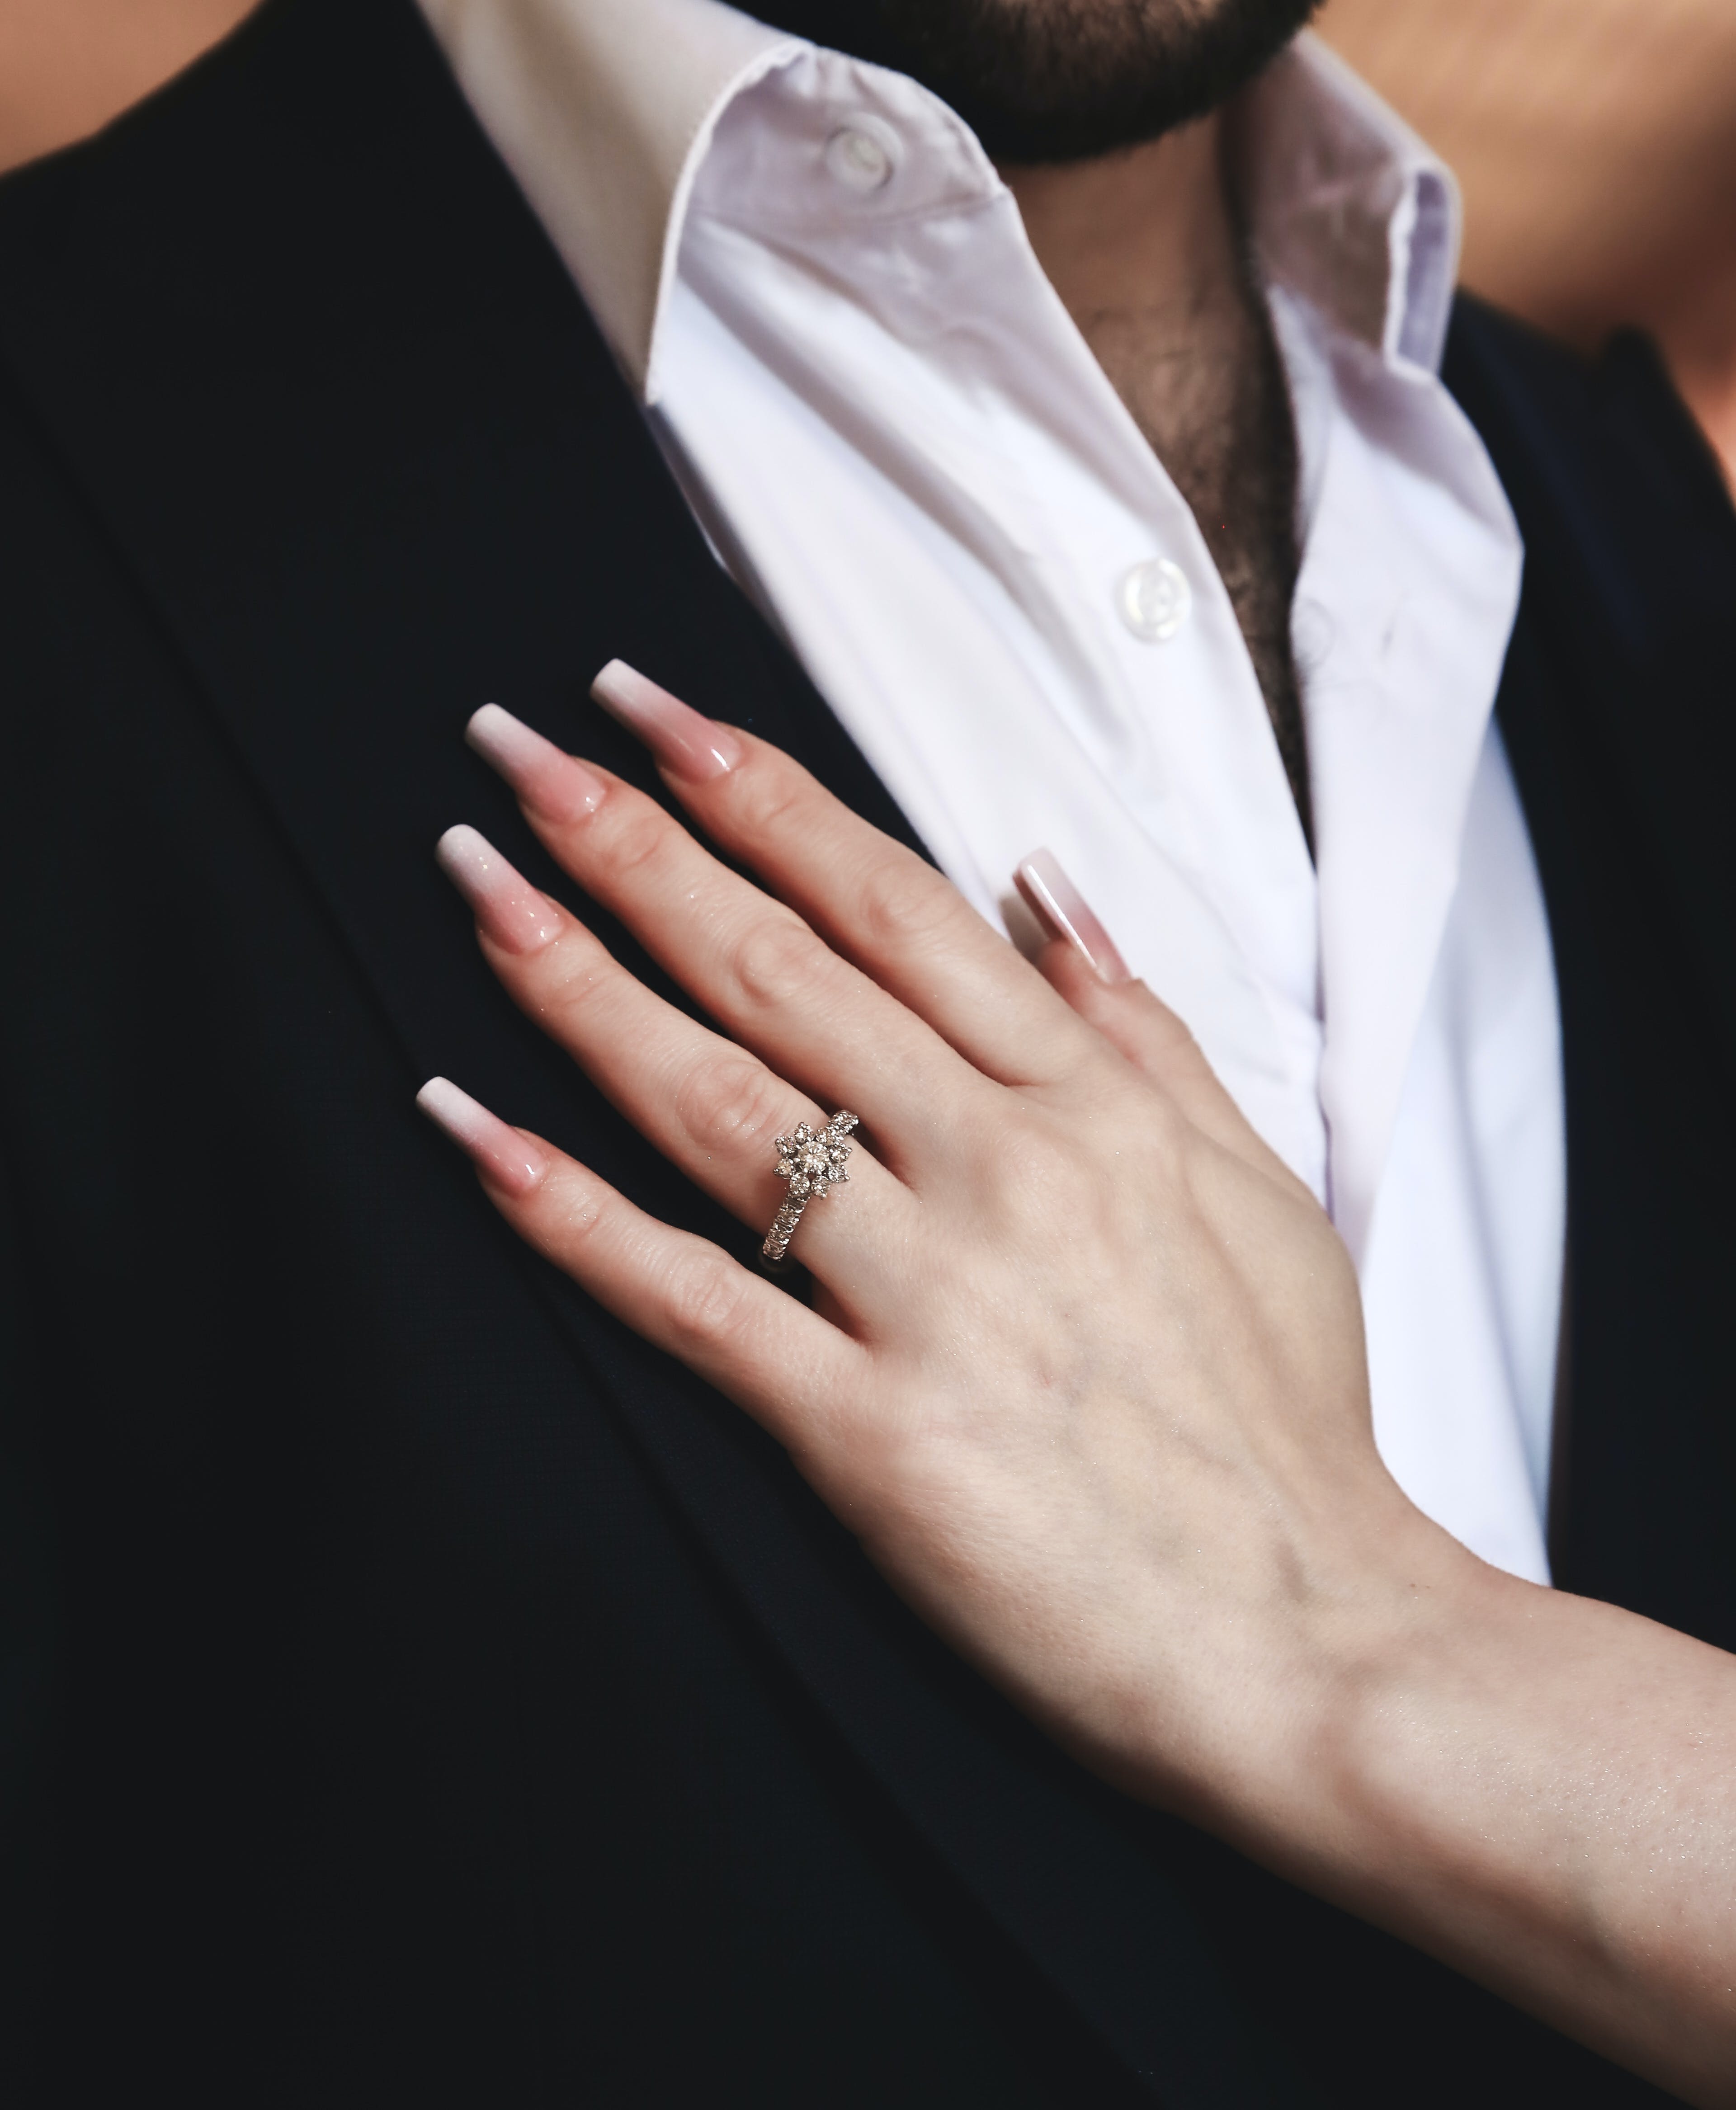 A woman resting her hand on a man's chest | Source: Pexels